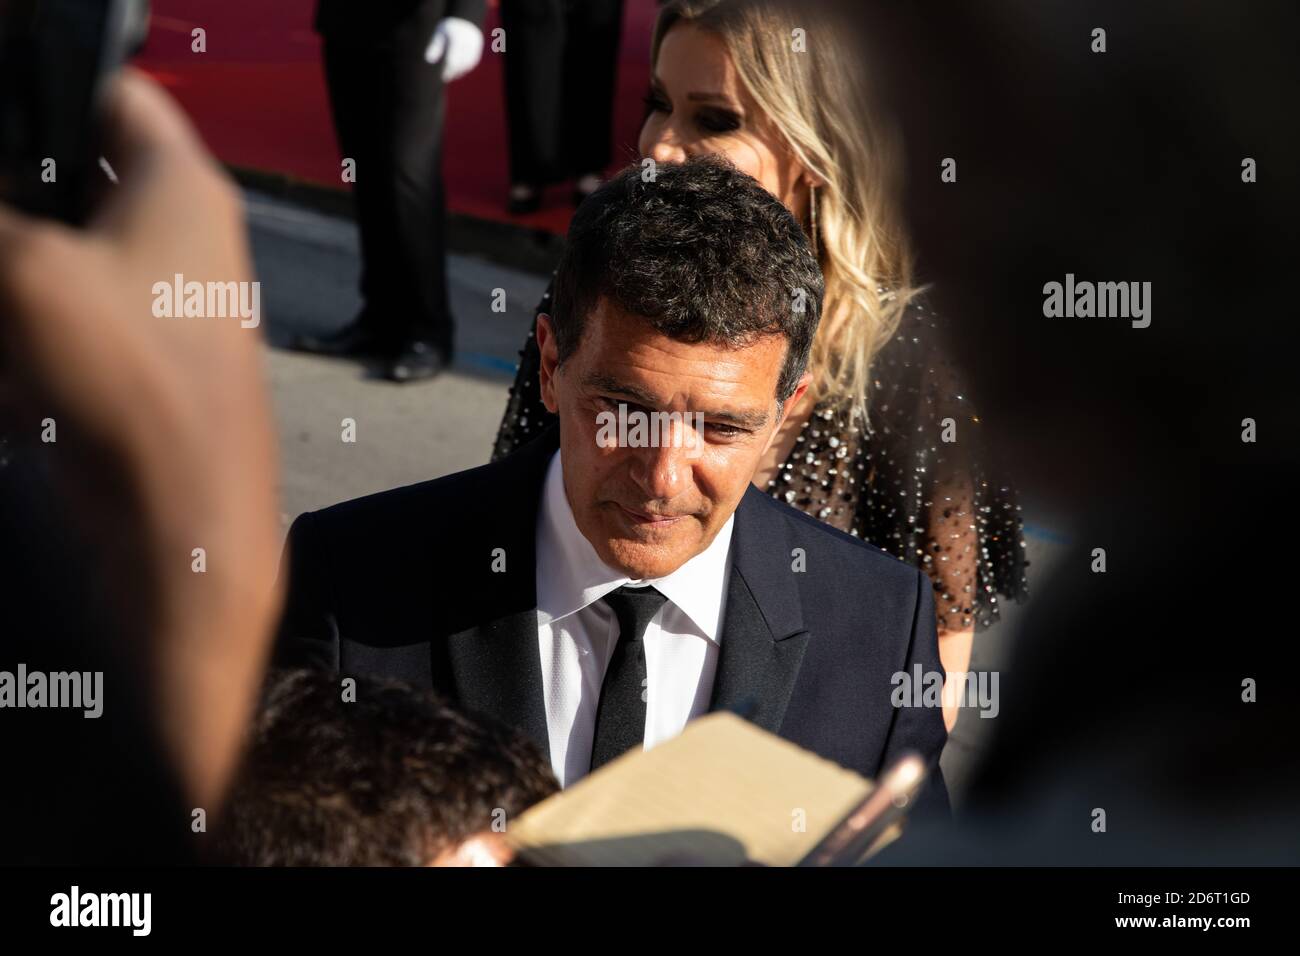 CANNES, FRANCE - May 25, 2019: Antonio Banderas arrives at the red carpet in Cannes and signs photos and takes pictures with his fans. Stock Photo